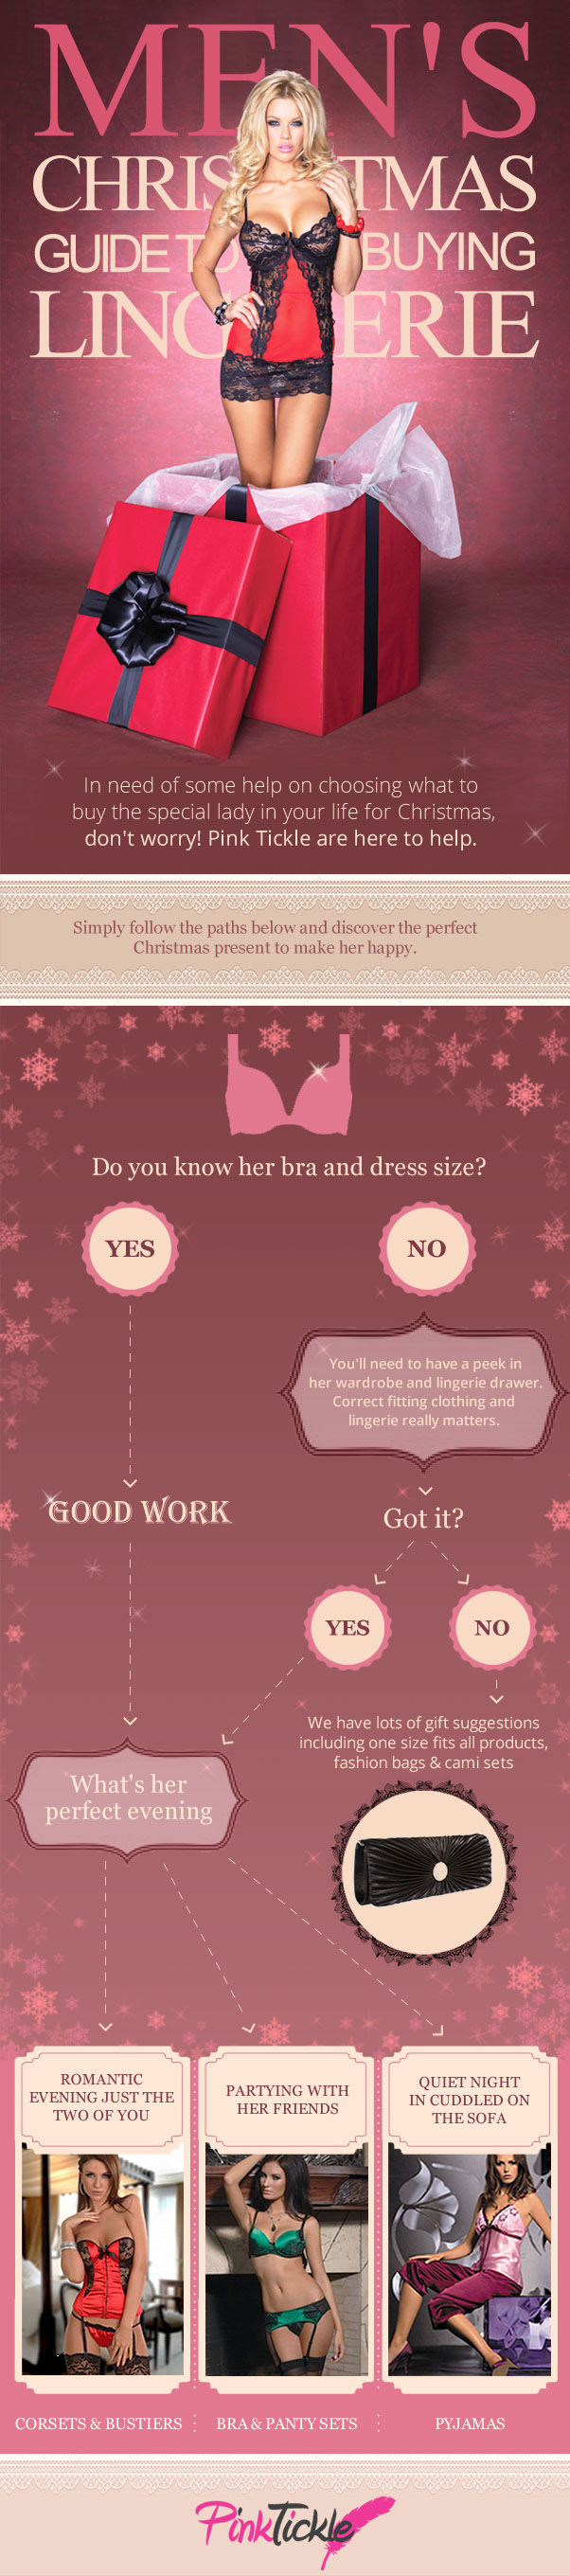 How to Pick Lingerie for Her-Infographic